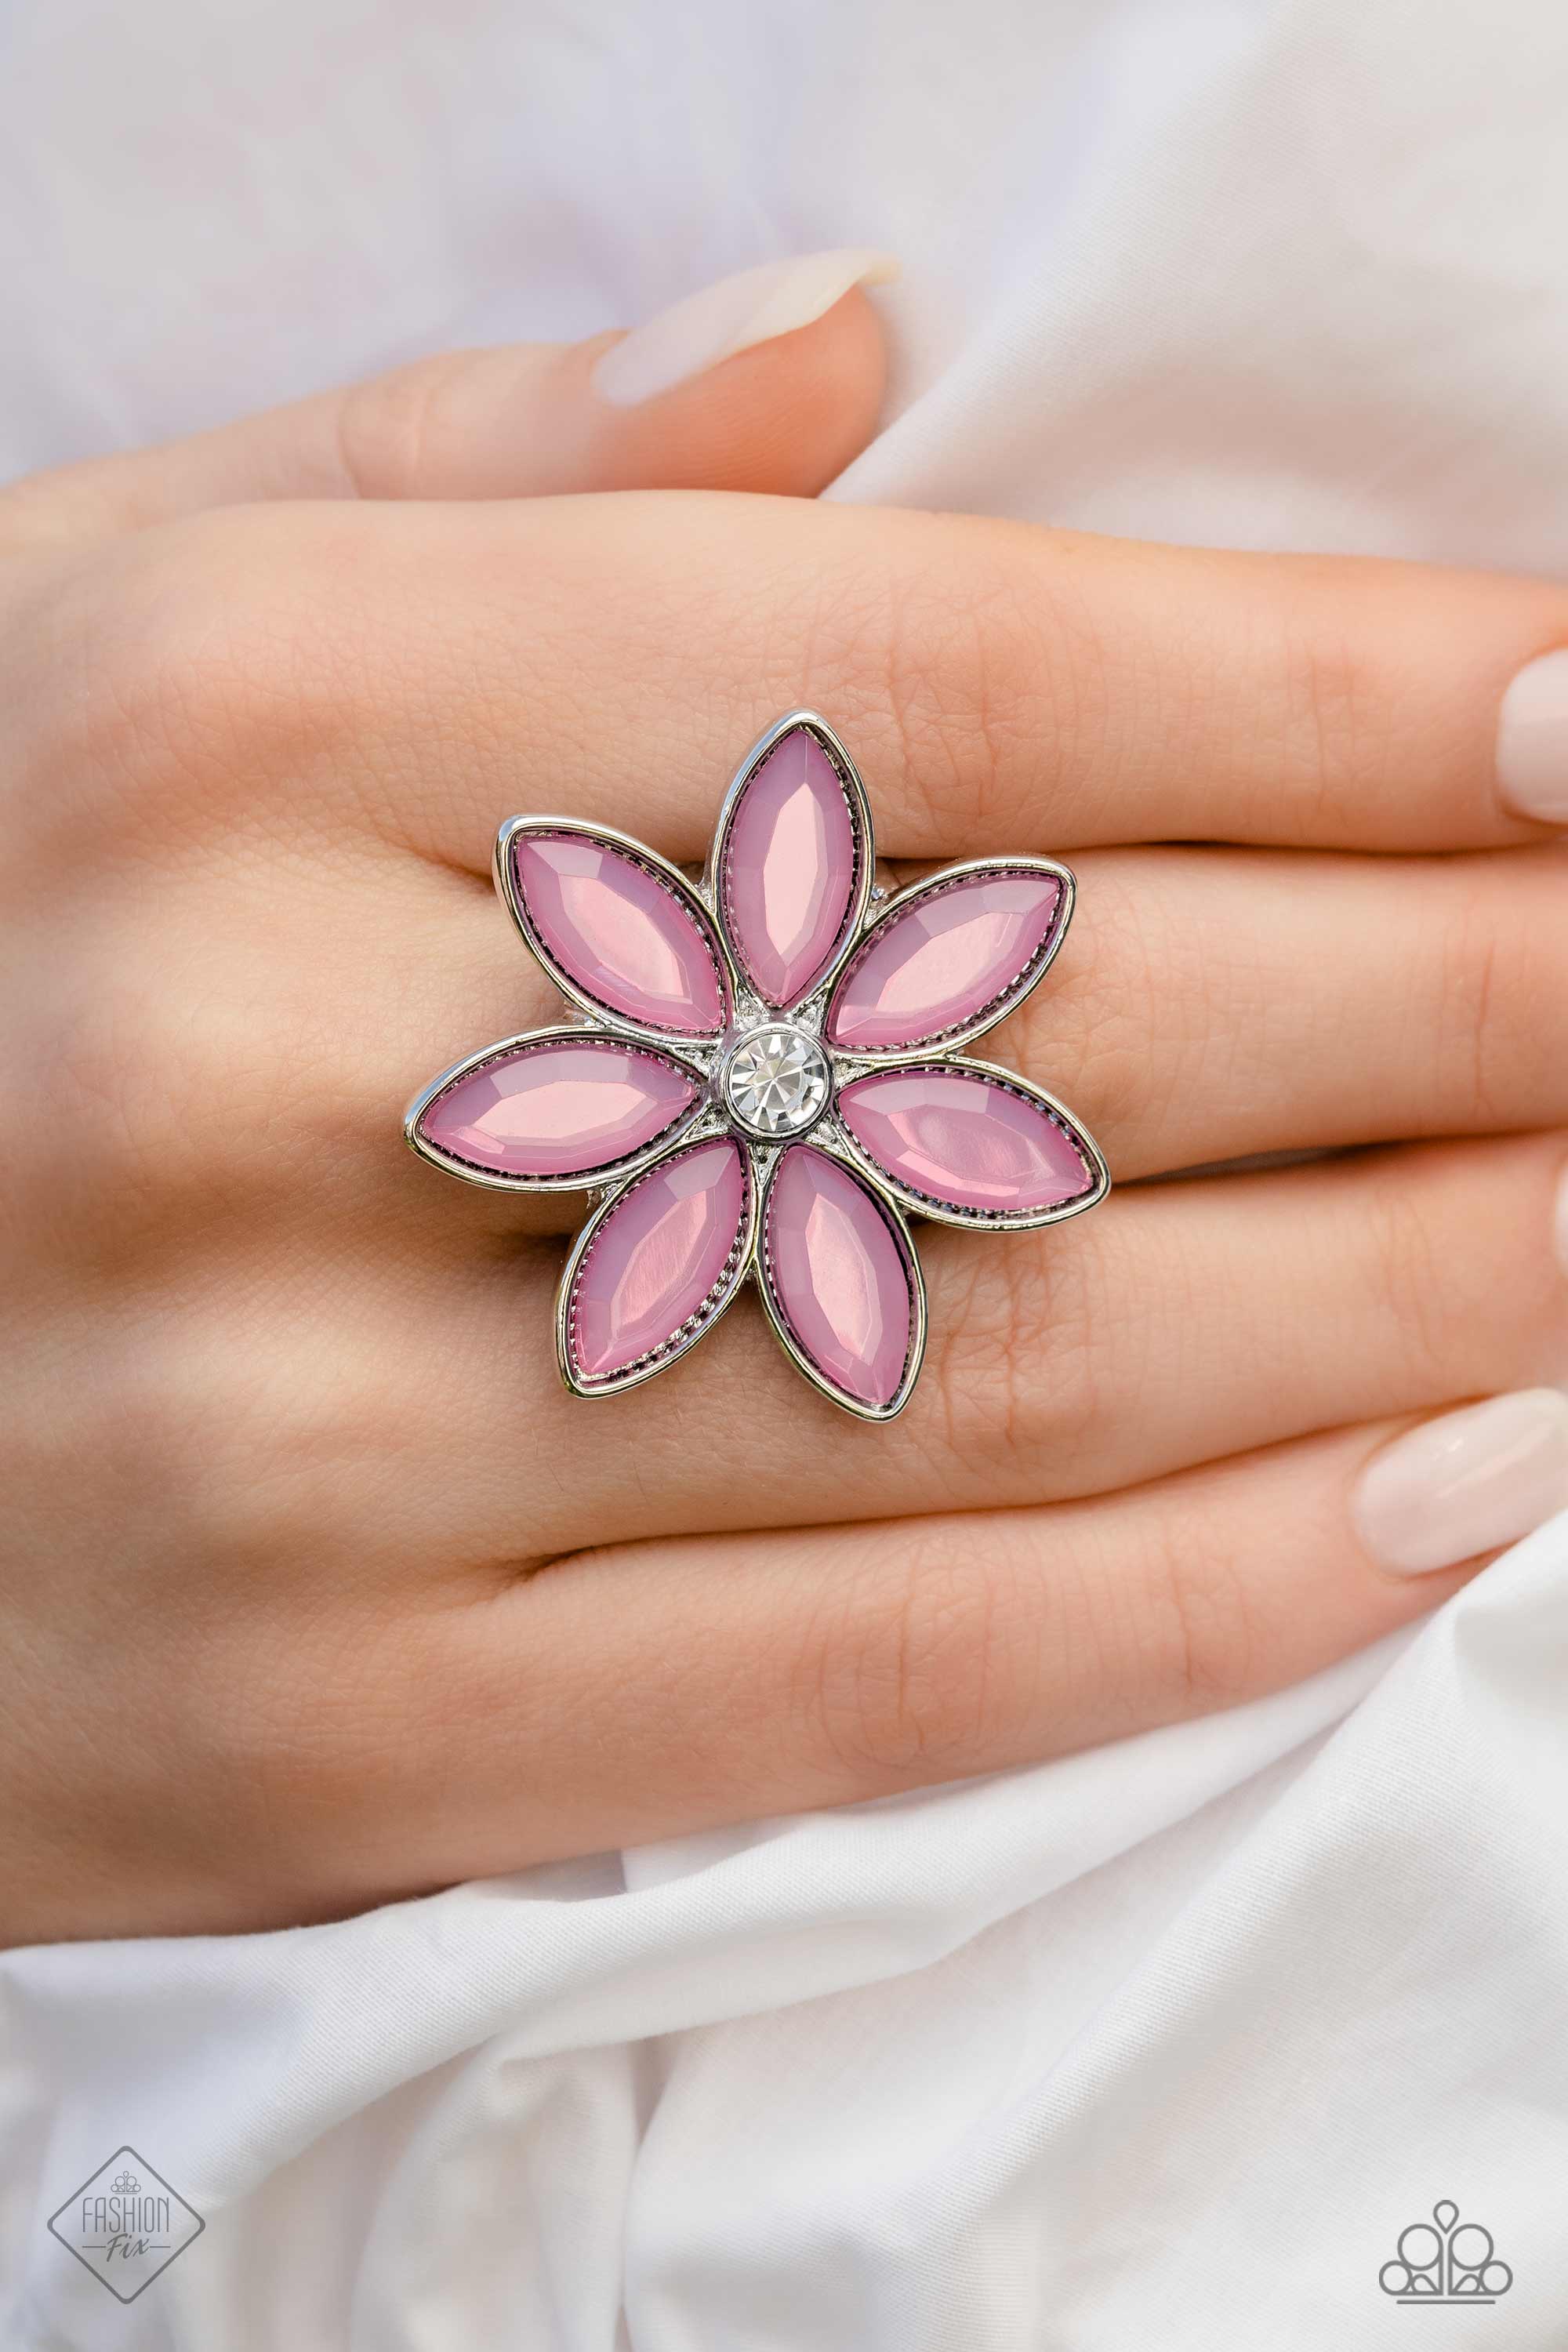 GARDEN My French Purple Flower Ring - Paparazzi Accessories- lightbox - CarasShop.com - $5 Jewelry by Cara Jewels